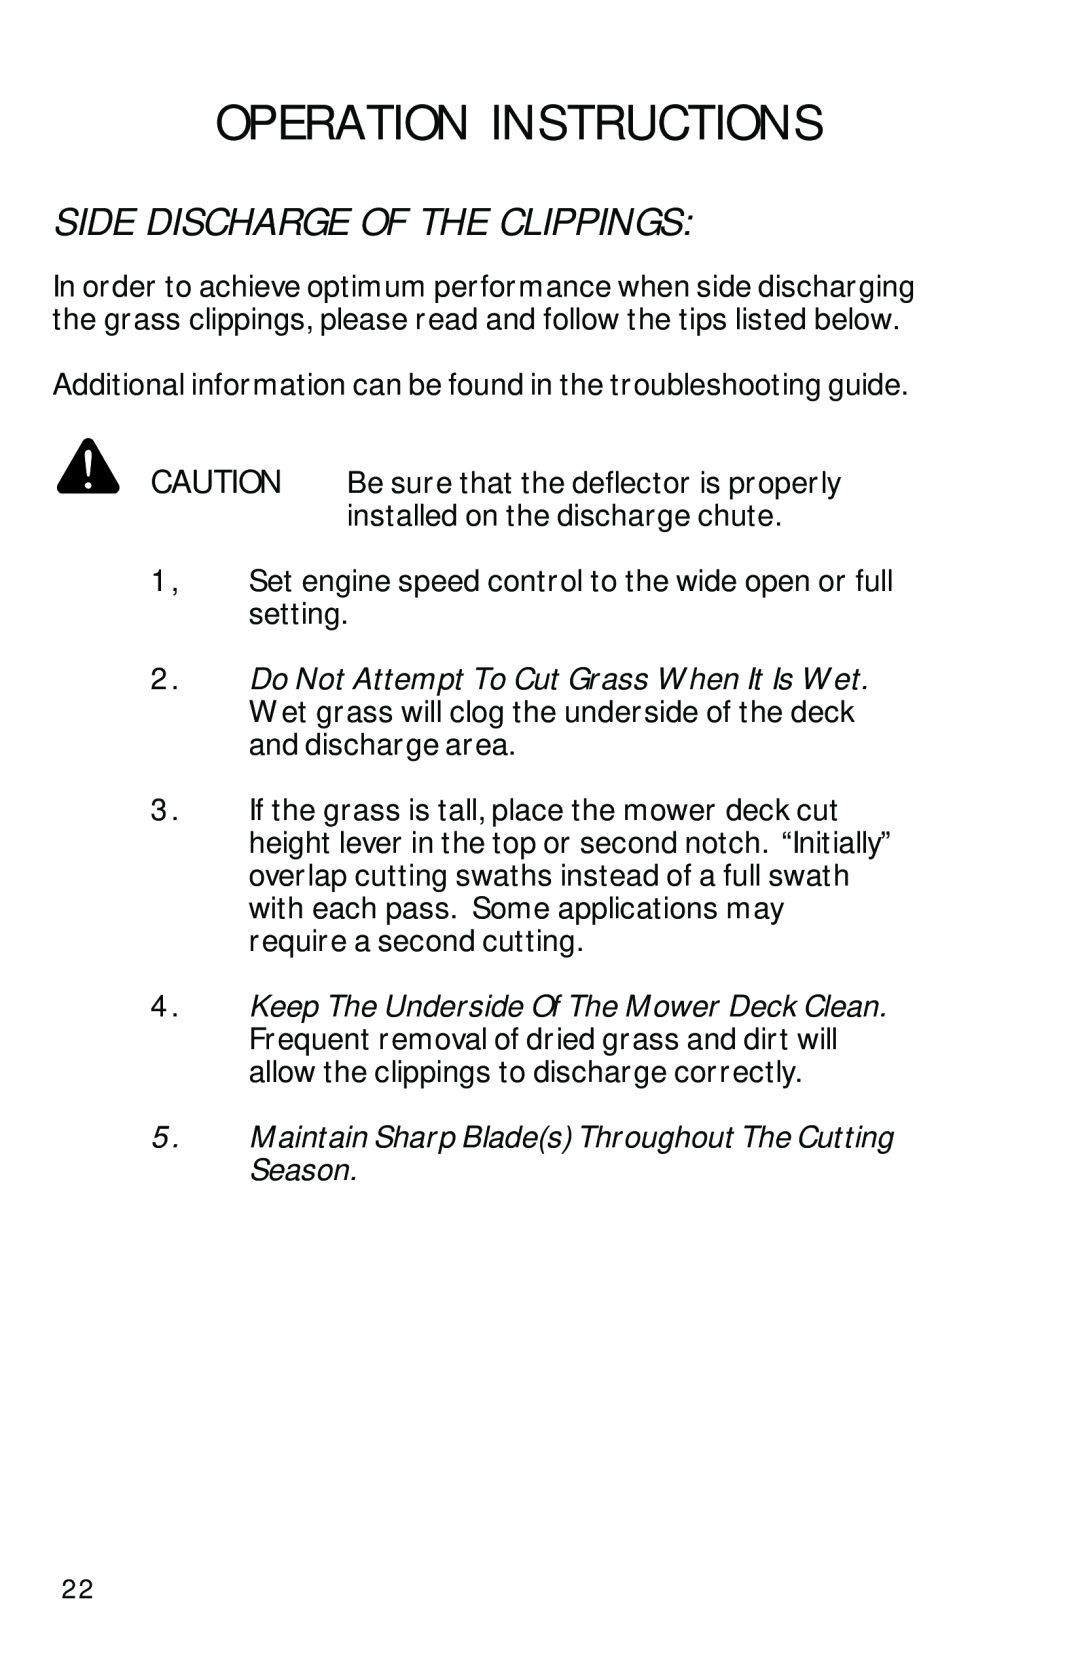 Dixon ZTR 2002 manual Side Discharge Of The Clippings, Operation Instructions 